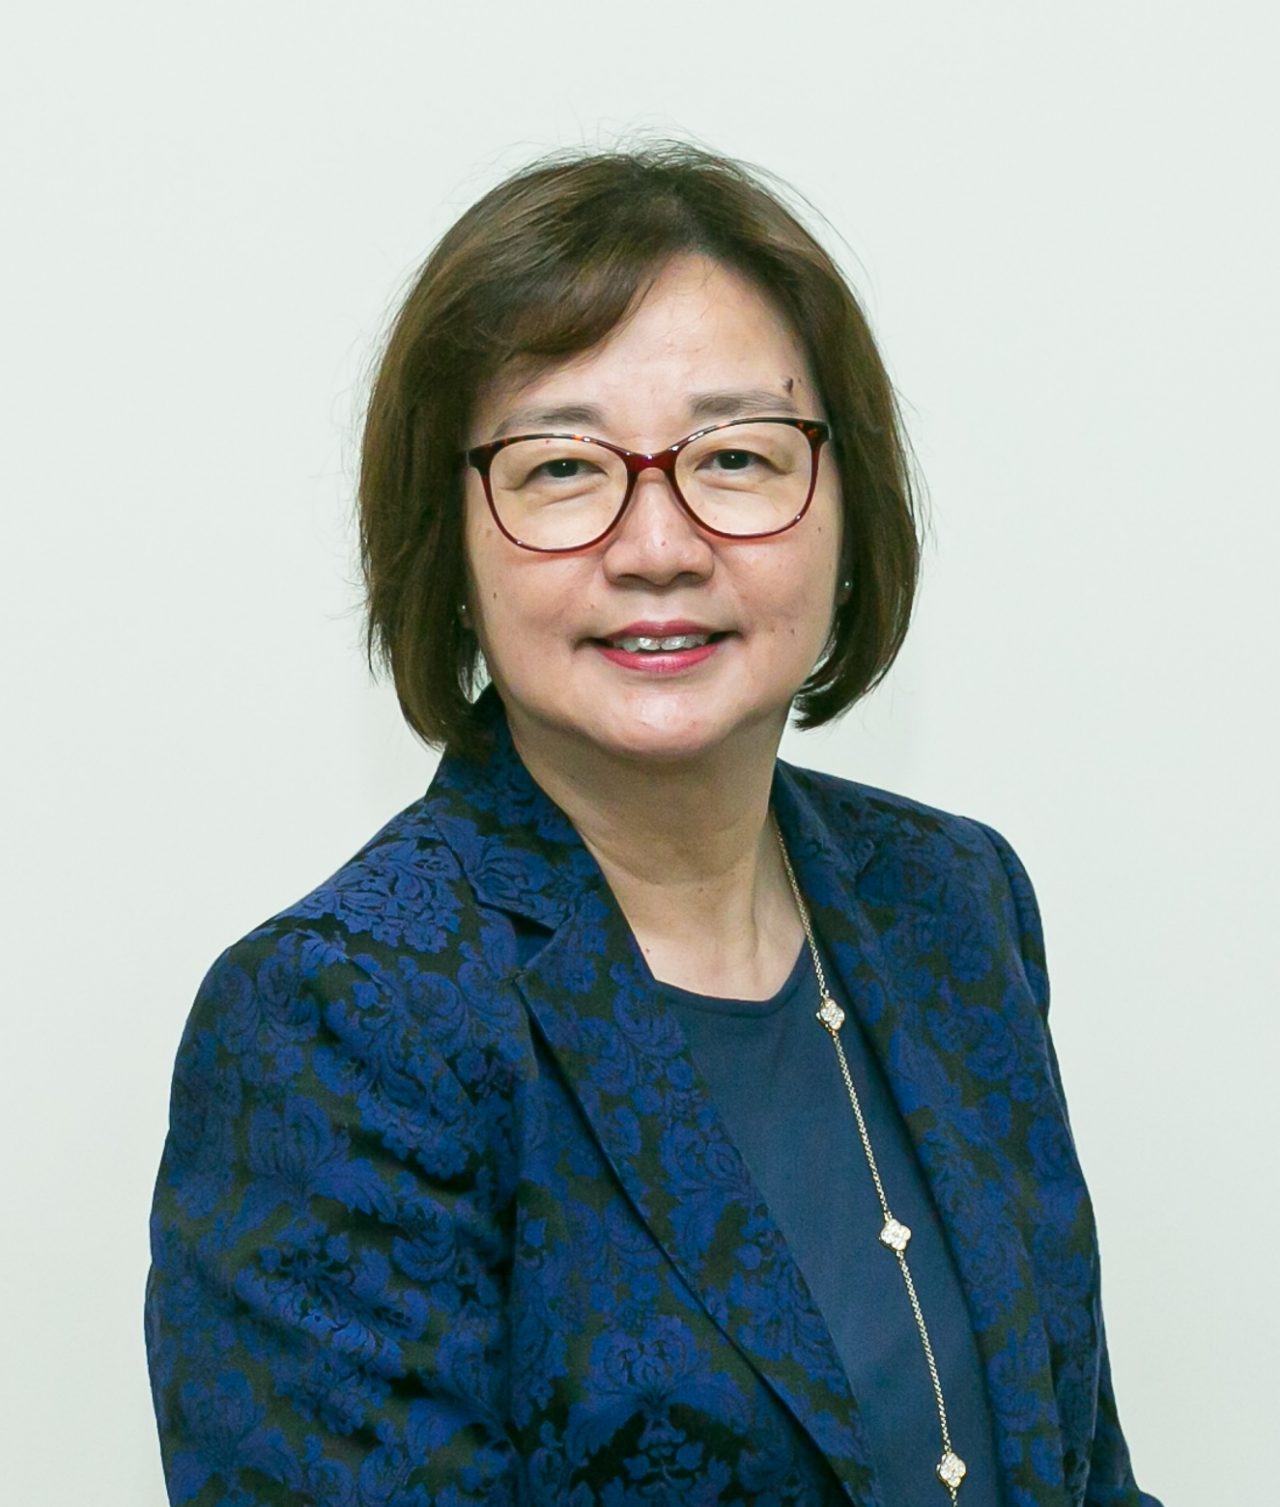 An image of Ms Tan Huey Min, Head of Credit Counselling Singapore